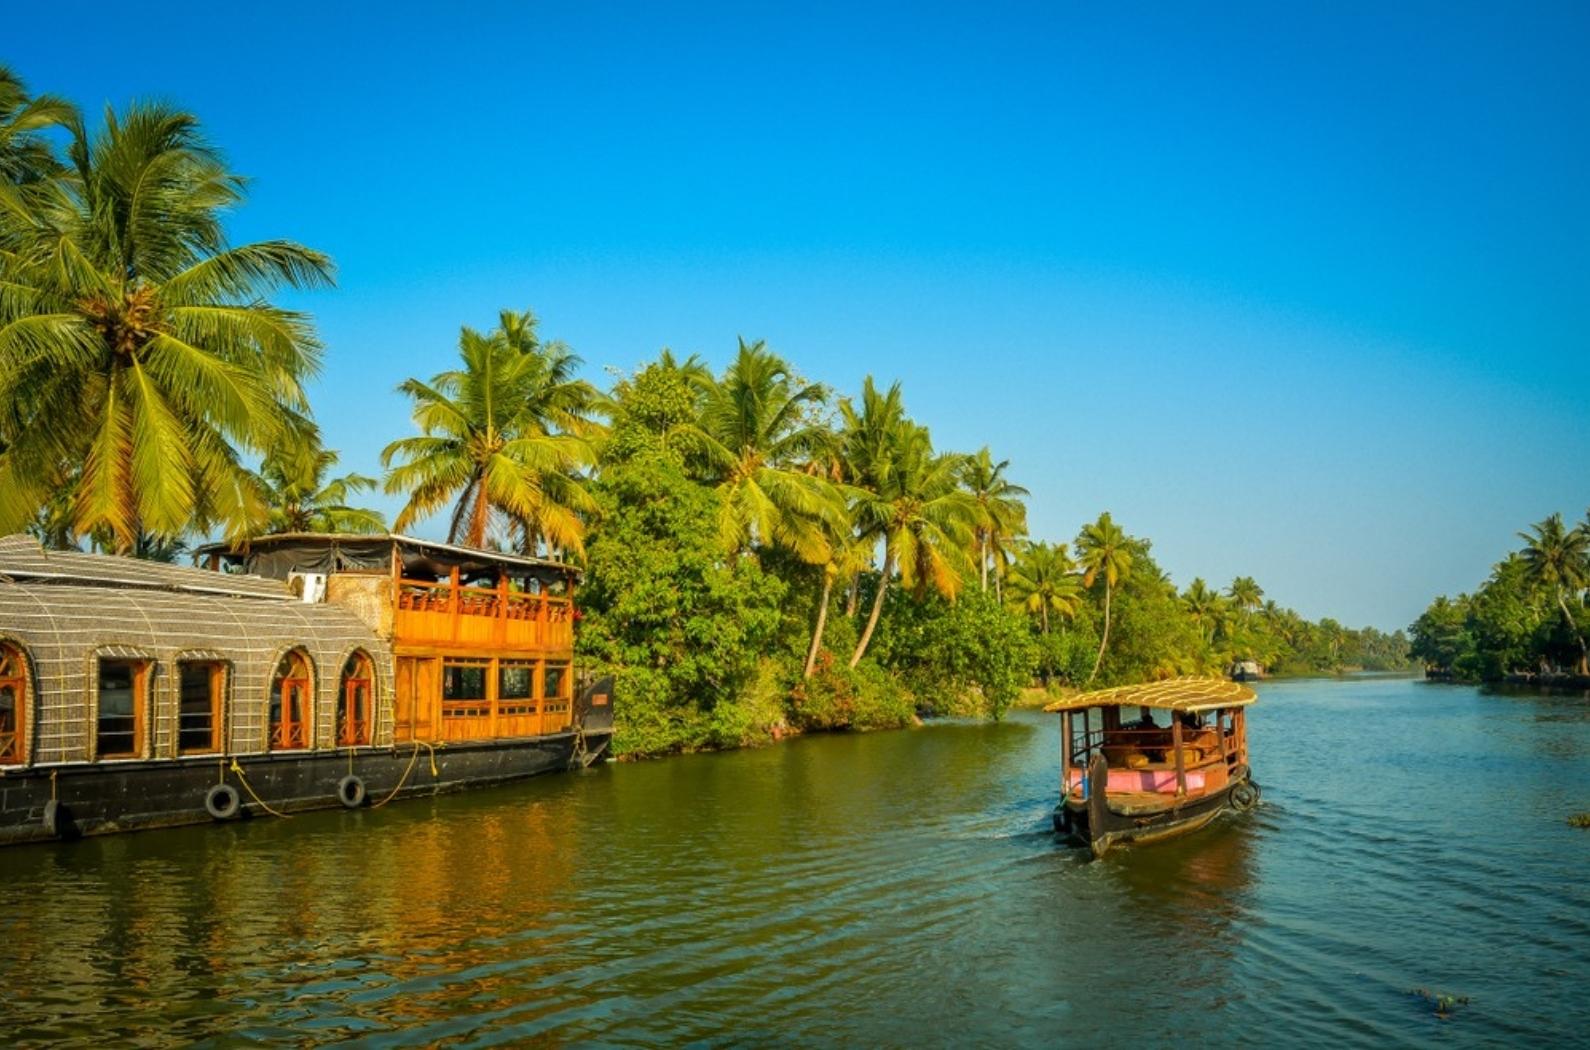 A tourist boat passes through a traditional Kerala houseboat on the backwater of Vembanad Lake.